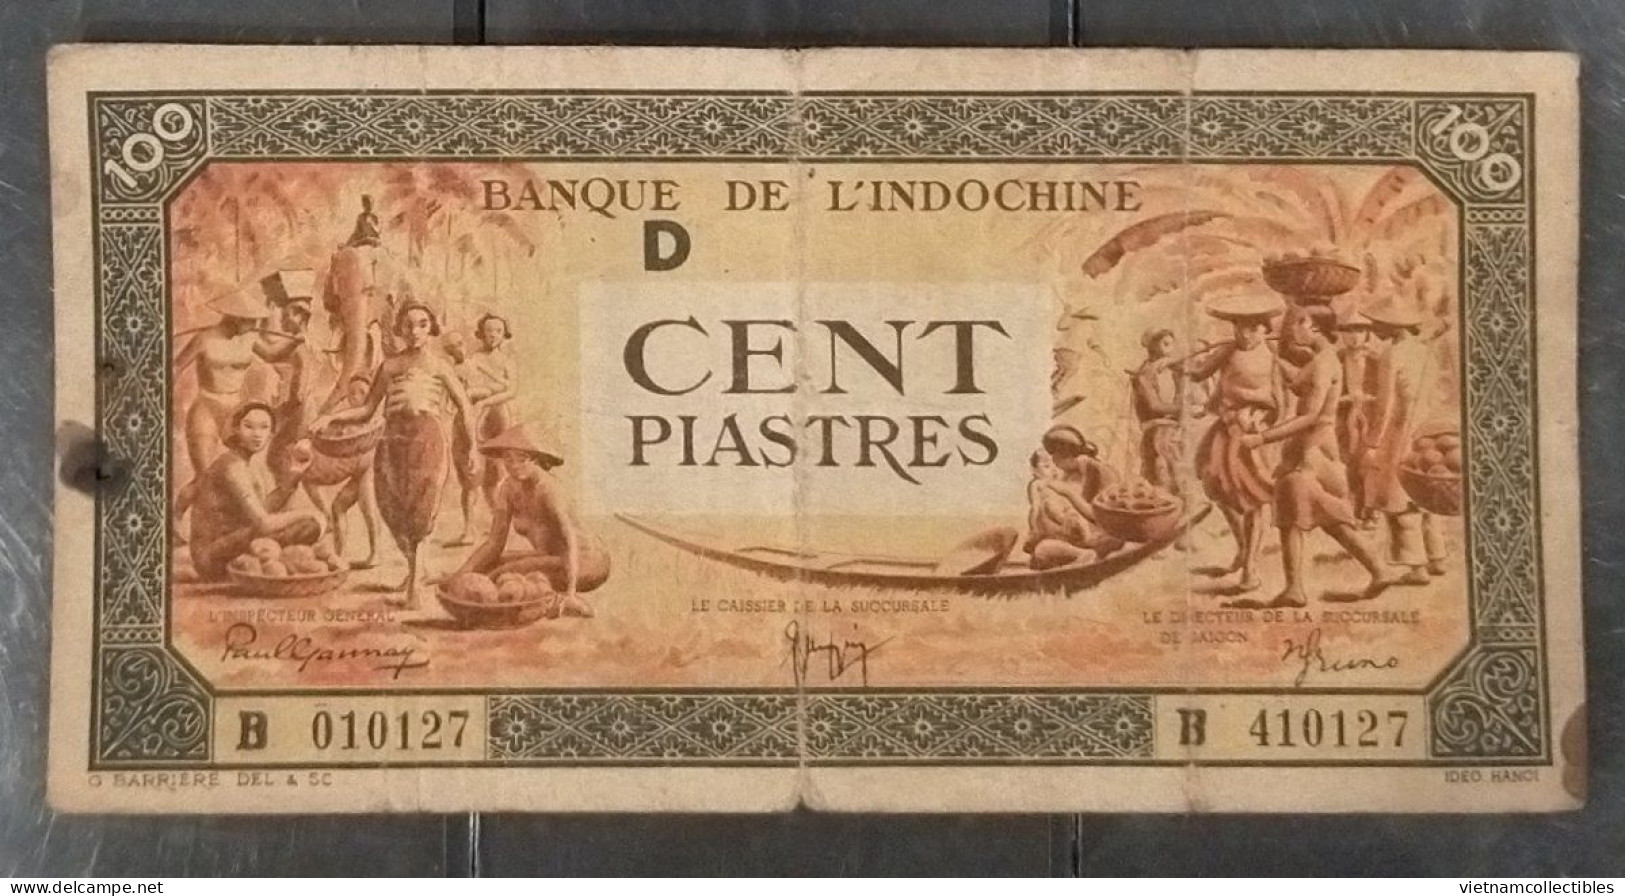 French Indochina Indochine Laos Vietnam Cambodia 100 Piastres Fine Banknote Note 1942-45 - Pick # 73 / 02 Photos - Indochine